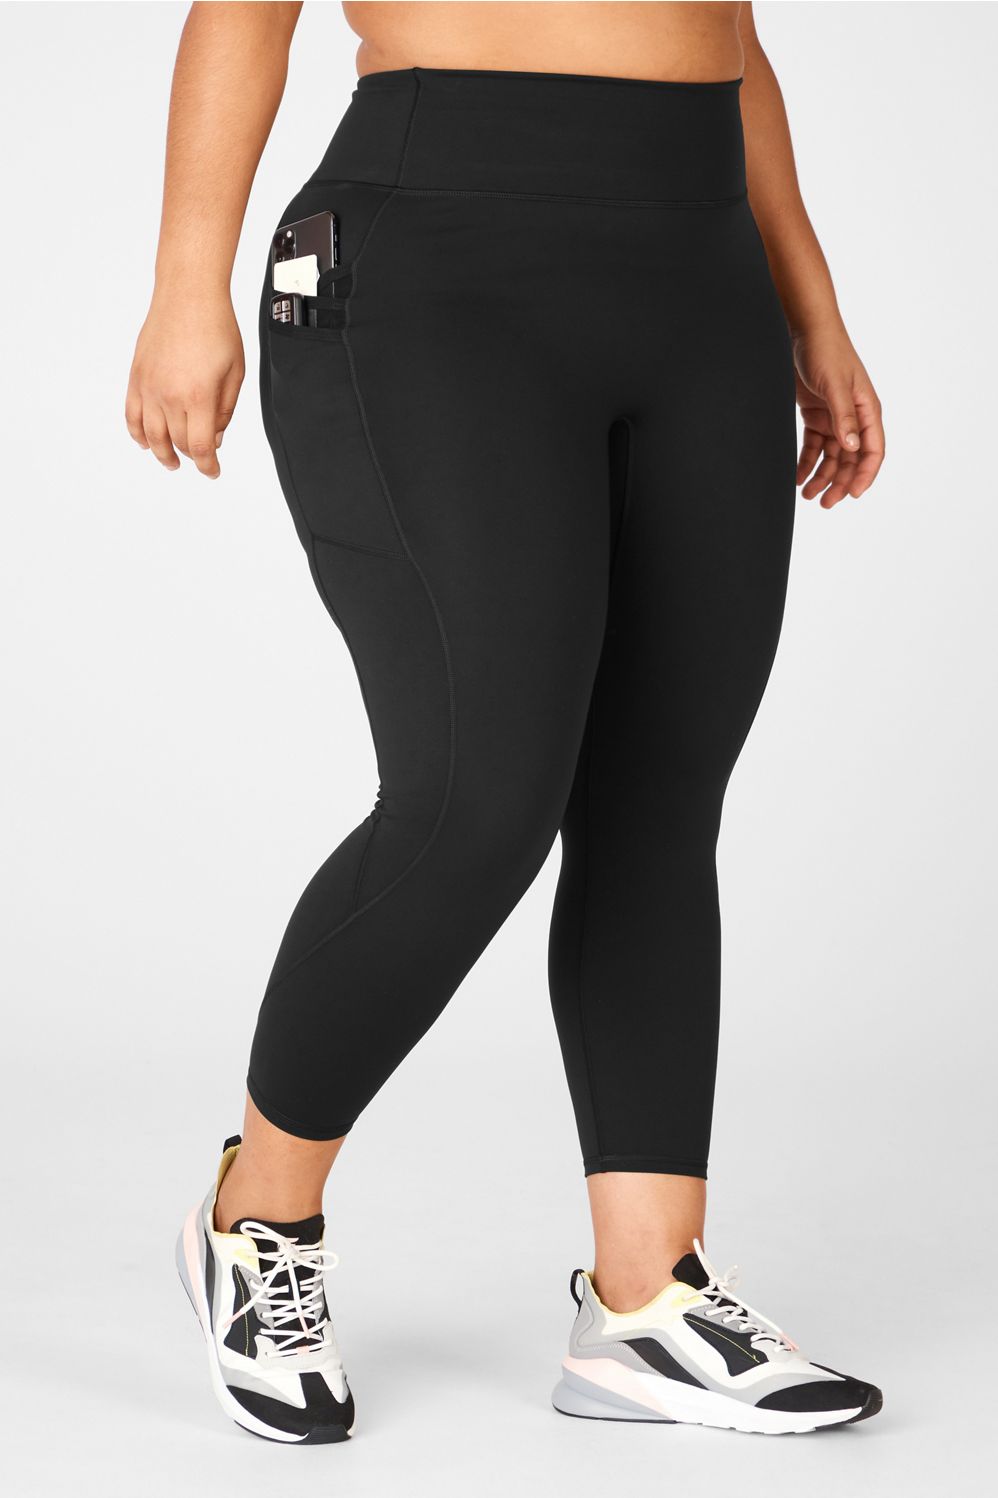 Fabletics Review - Trinity High-Waisted Pocket Capri — The Athleisurely Life